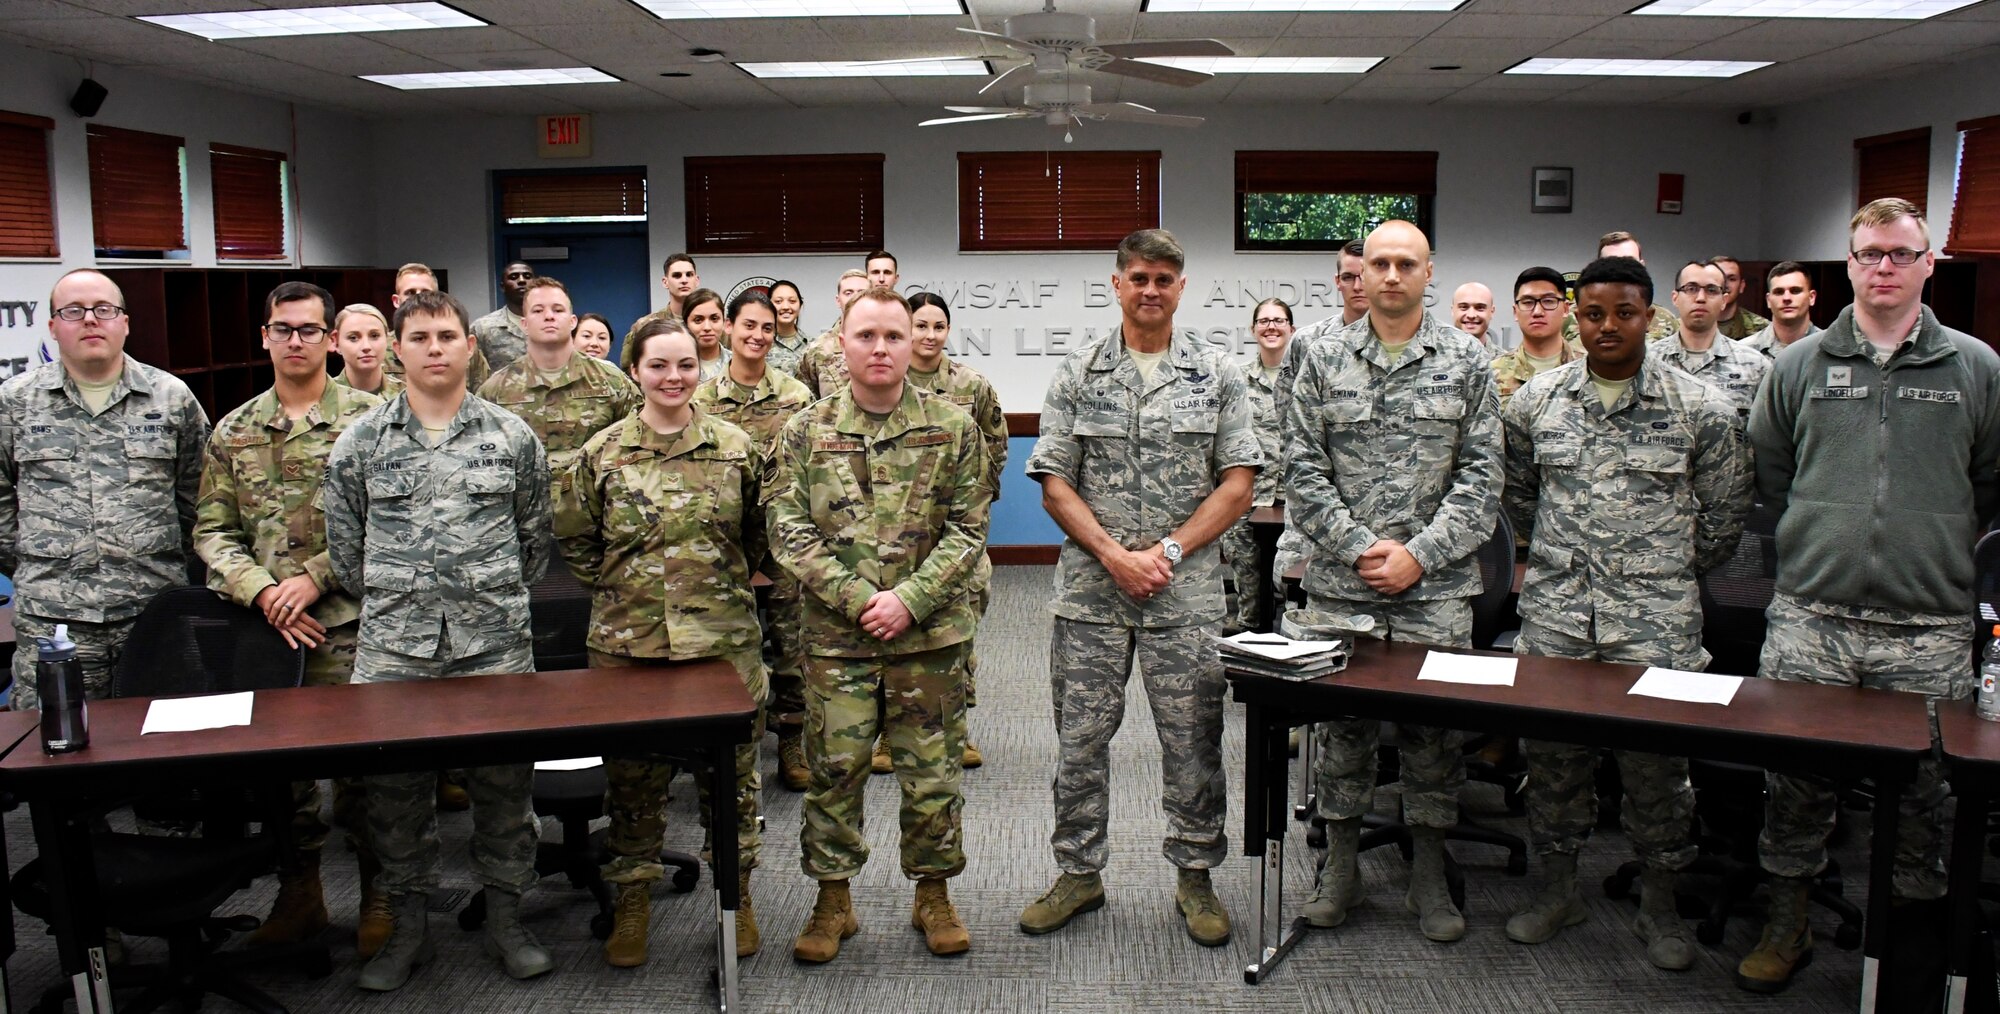 Commander of the 932nd Airlift Wing, Col. Glenn Collins, fourth from right, made a visit to the Airman Leadership School on June 11, 2019, at Scott Air Force Base, Ill.  He and Chief Master Sgt. Darren Wiseman (fifth from left), the 932nd Inspector General Superintendent, spoke to future non-commissioned officers on leading, responsibility, and taking care of their units.  (U.S. Air Force photo by Lt. Col. Stan Paregien)